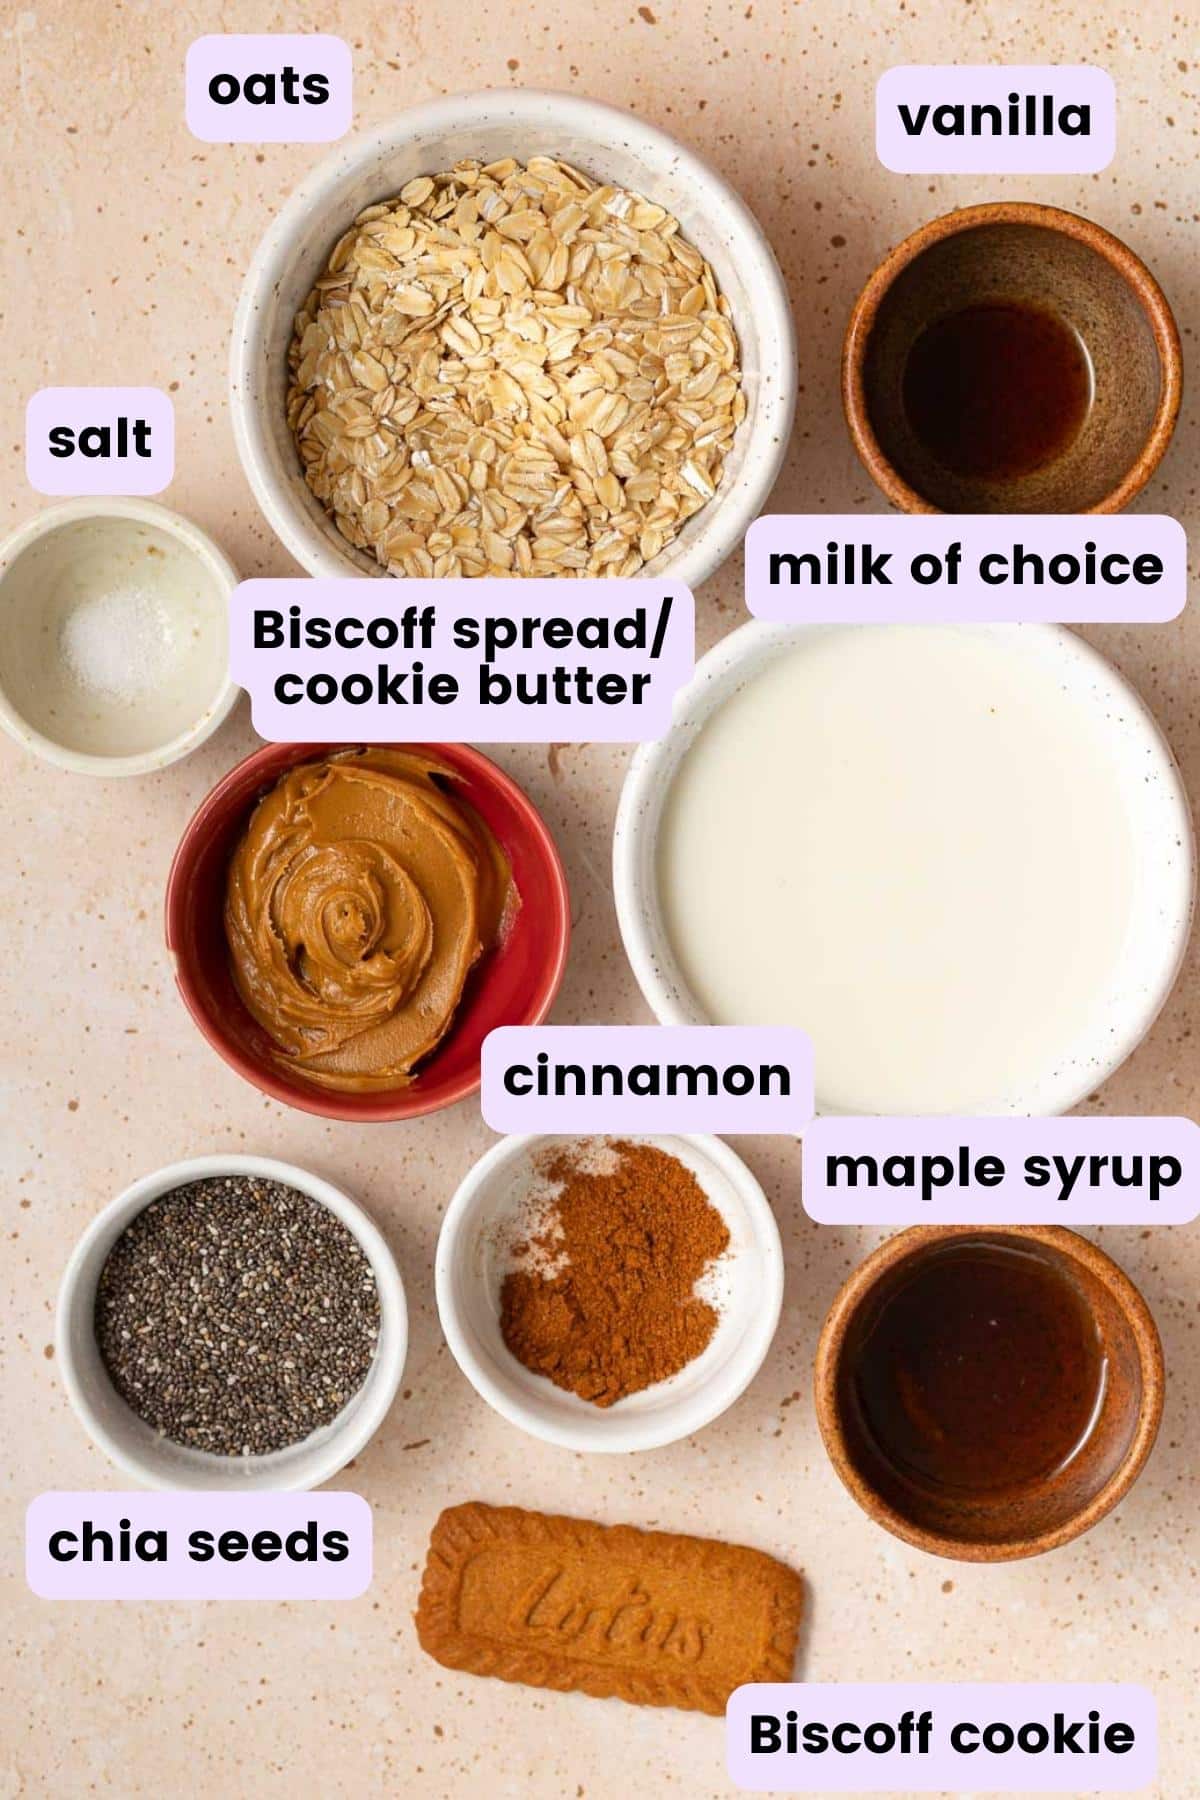 the ingredients needed to make Biscoff overnigth oats, as per the written ingredients list in the recipe card